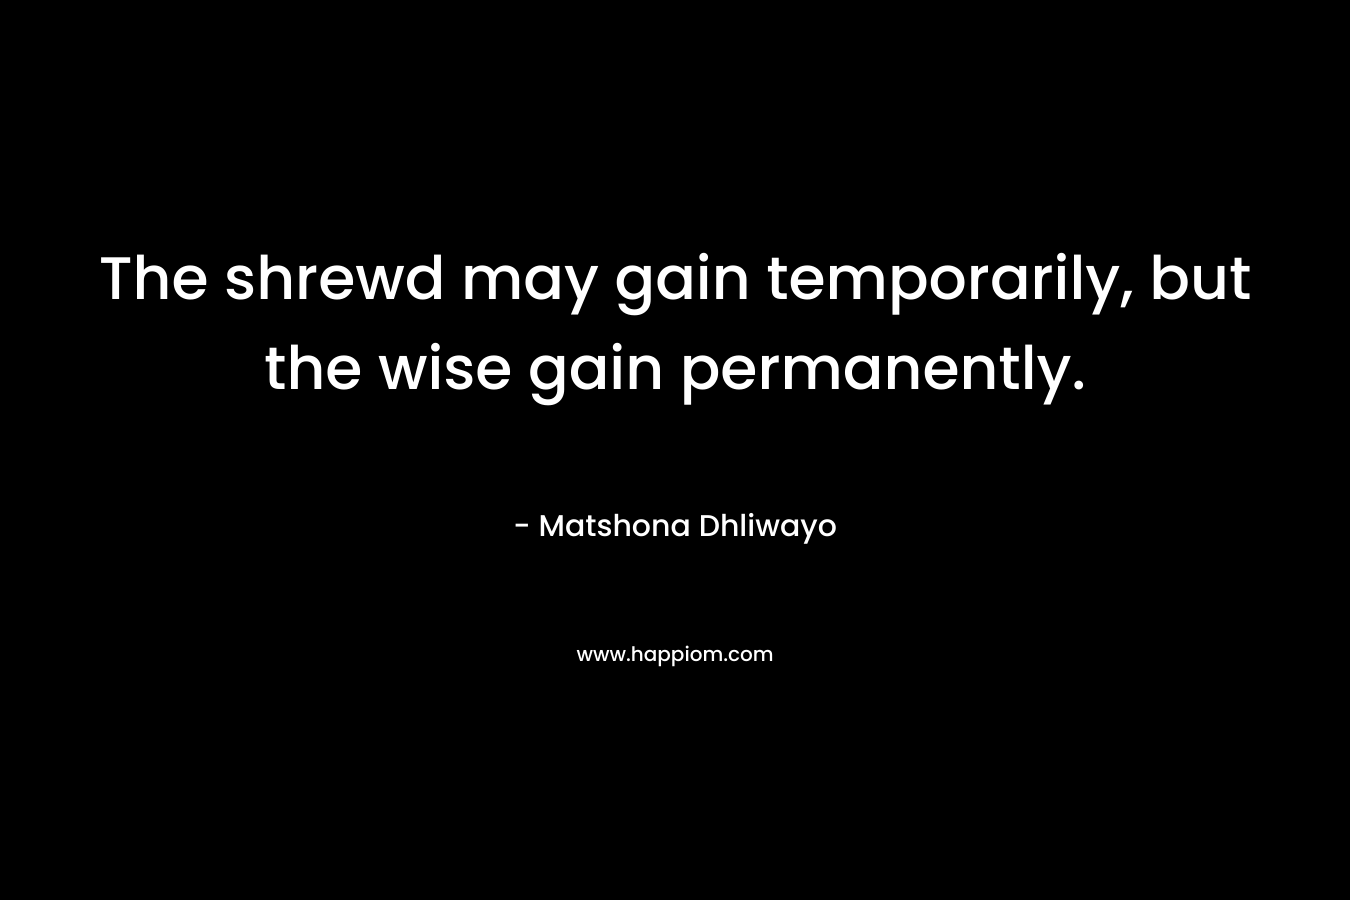 The shrewd may gain temporarily, but the wise gain permanently. – Matshona Dhliwayo